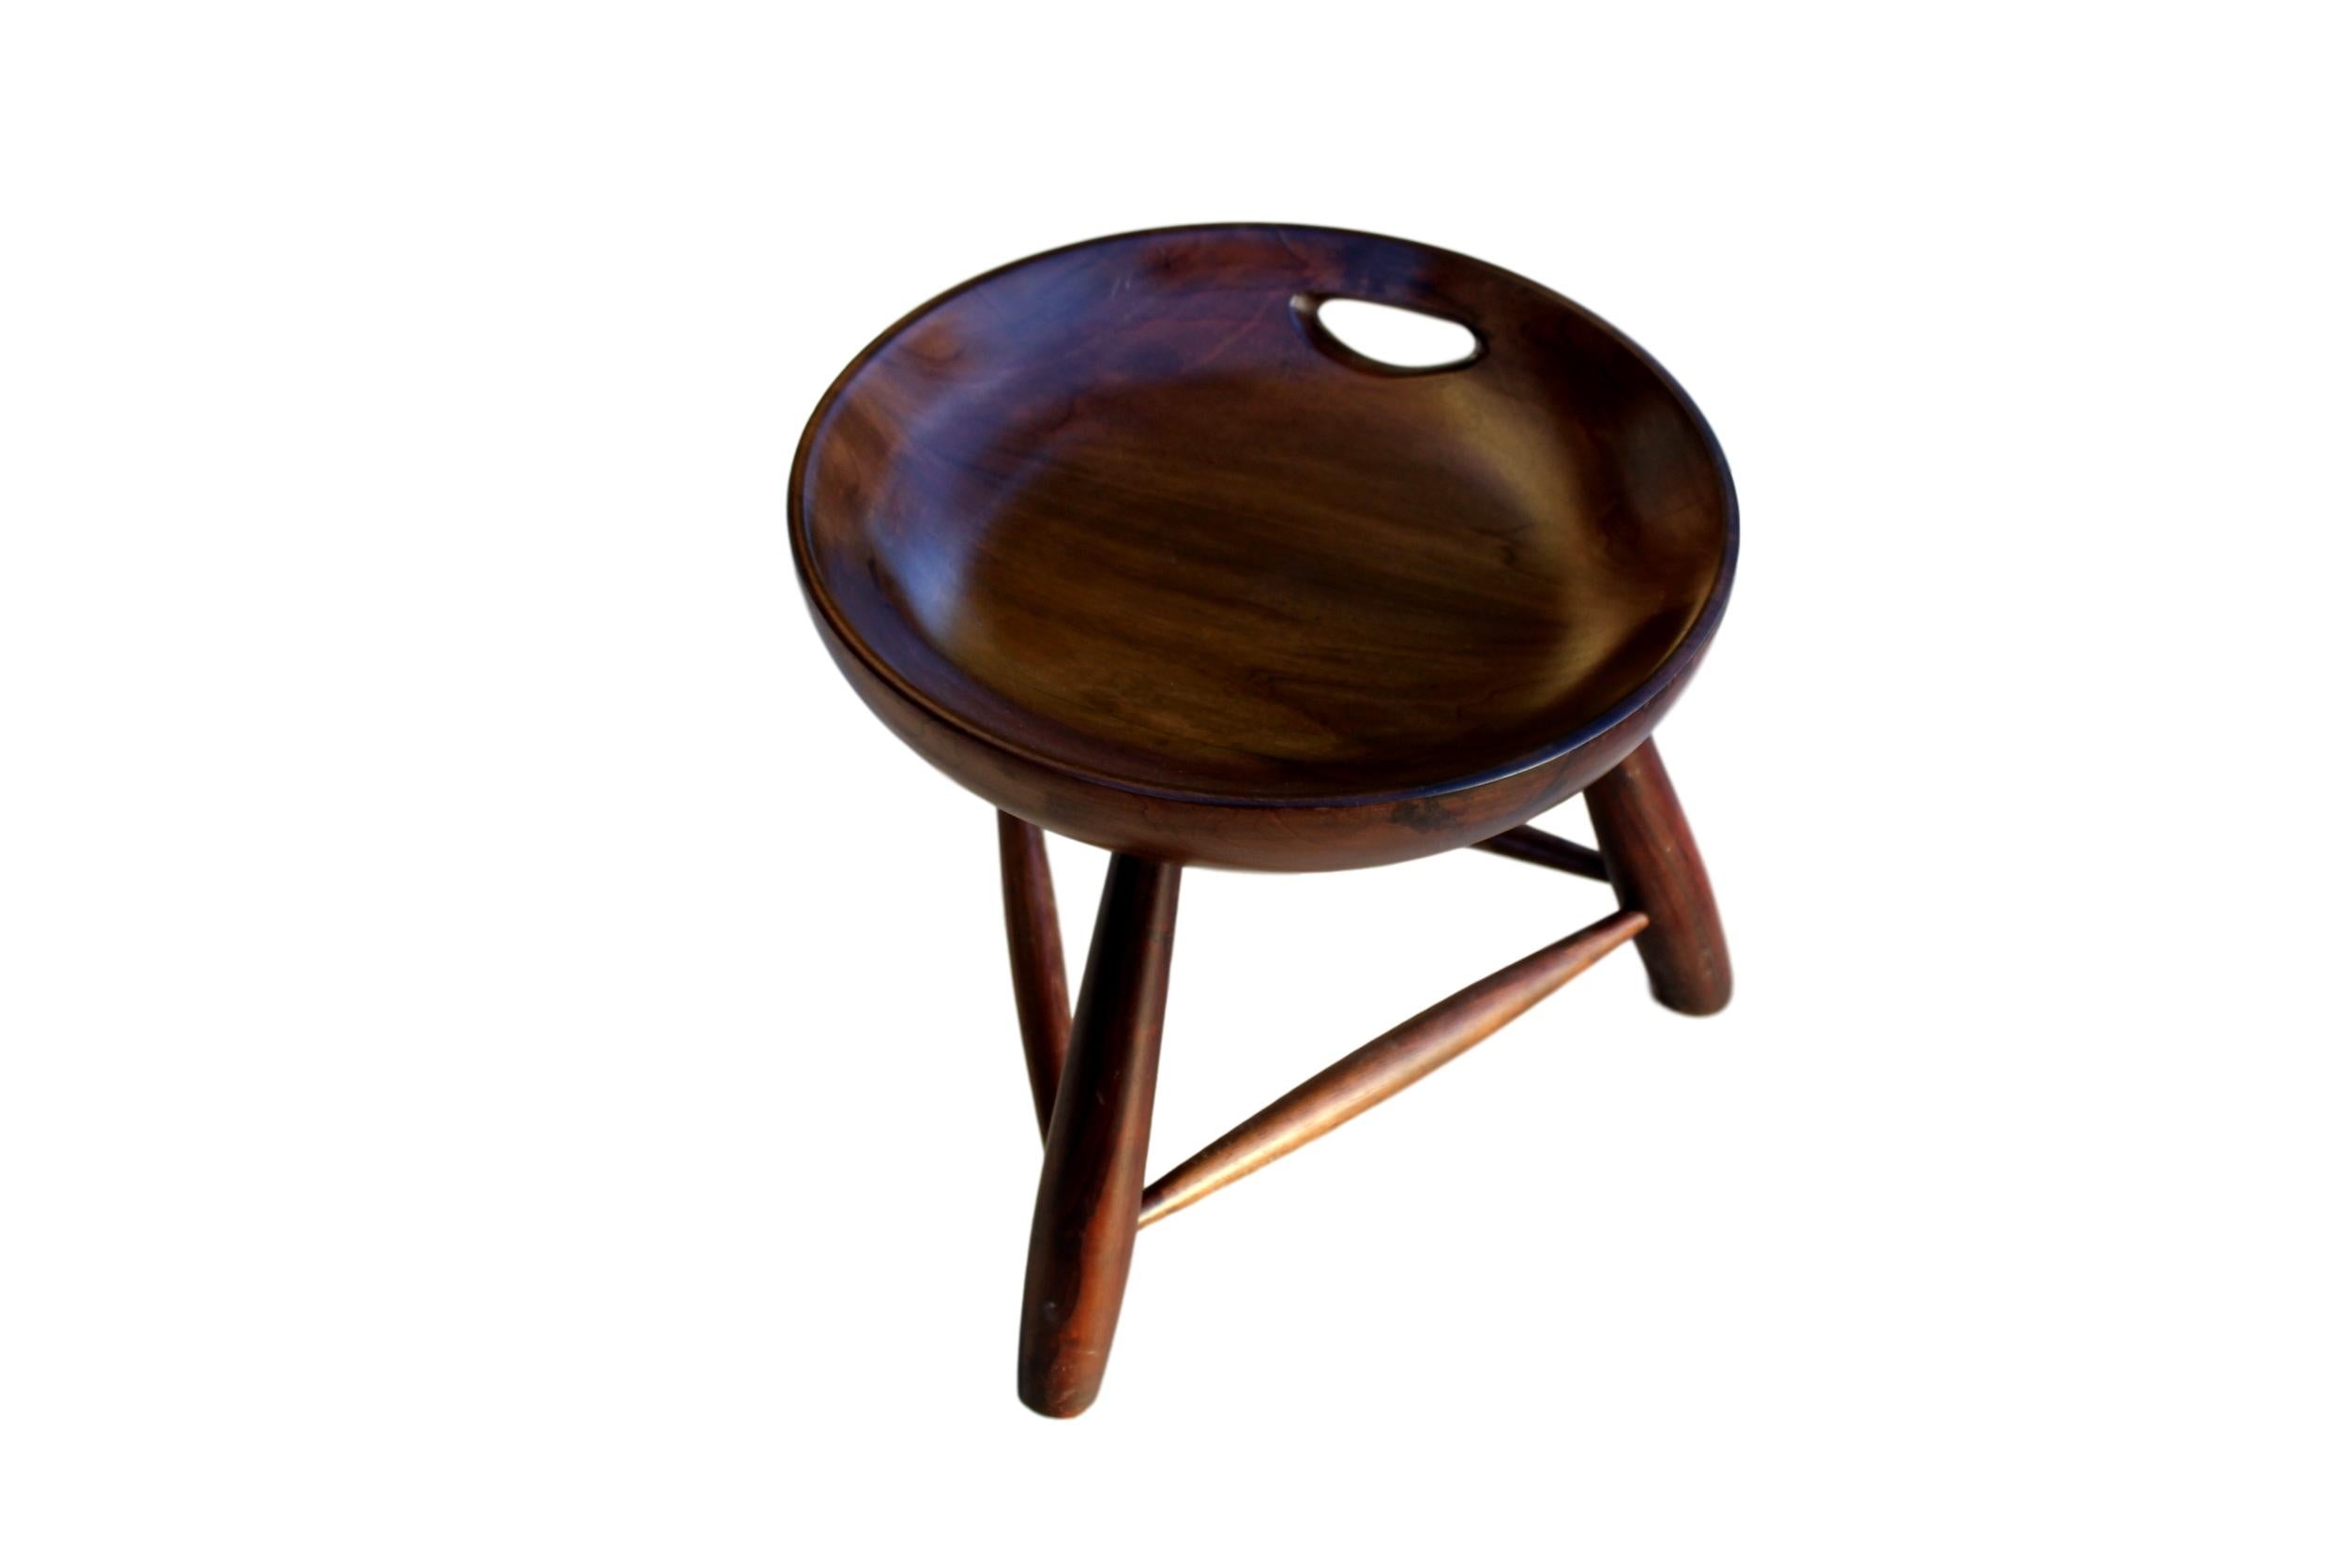 Mid-Century Modern 'Mocho' stool in hardwood by Brazilian designer Sergio Rodrigues. Each with concave seat and handle, on turned bulbous form legs with spreader bars. Good vintage condition, consistent with age and use.

P.S. Colors may